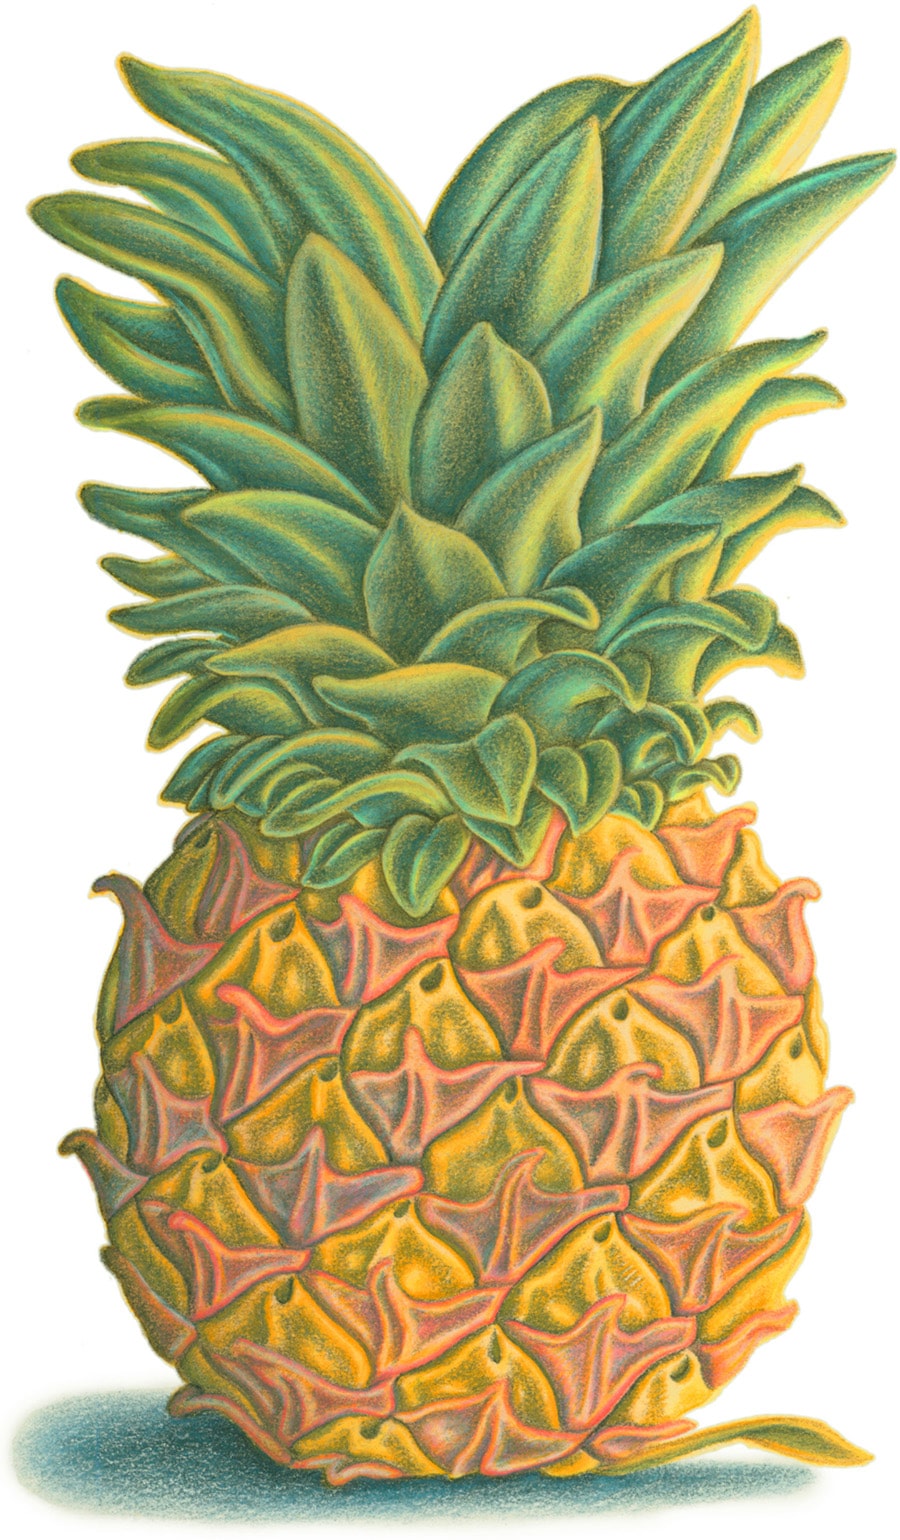 Hand Drawn Food Illustrations. Illustration 1 ‘The Pineapple’ (Pixel dimensions available w1819 x h2956)